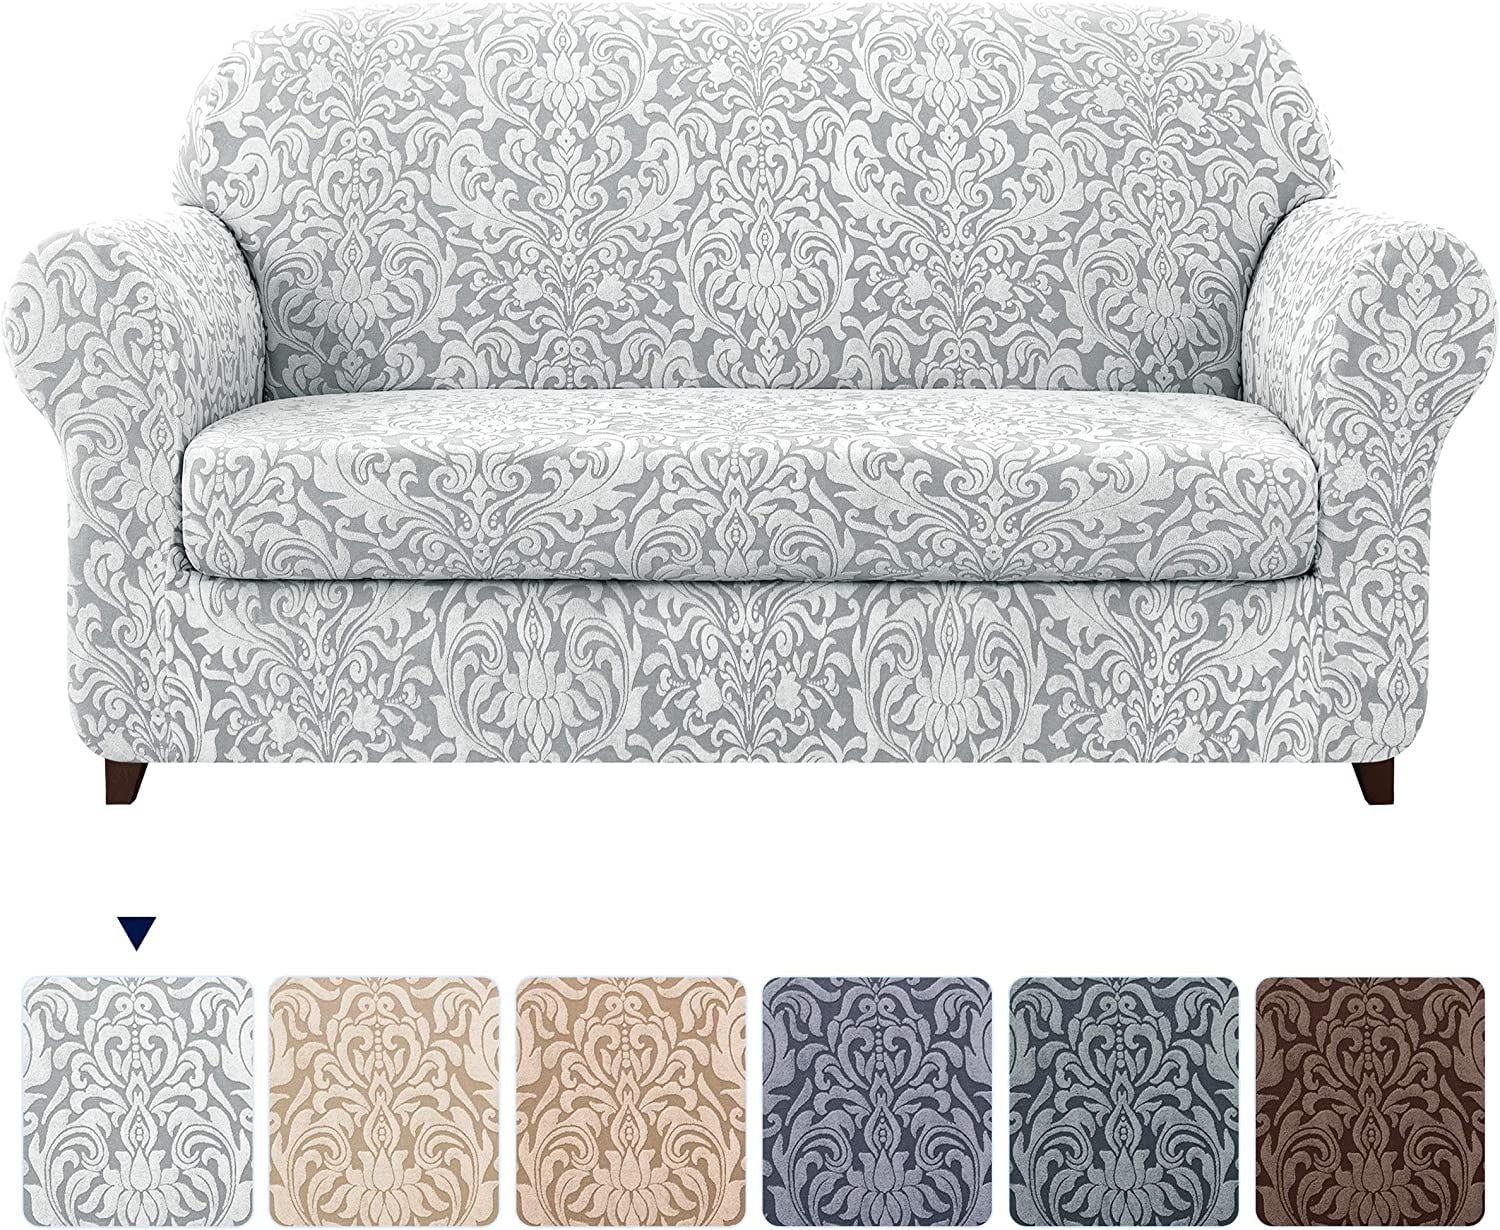 2PIECE JACQUARD STRETCH SOFA SLIPCOVER 3SEATER CUSHION COUCH COVER SLIPCOVER 